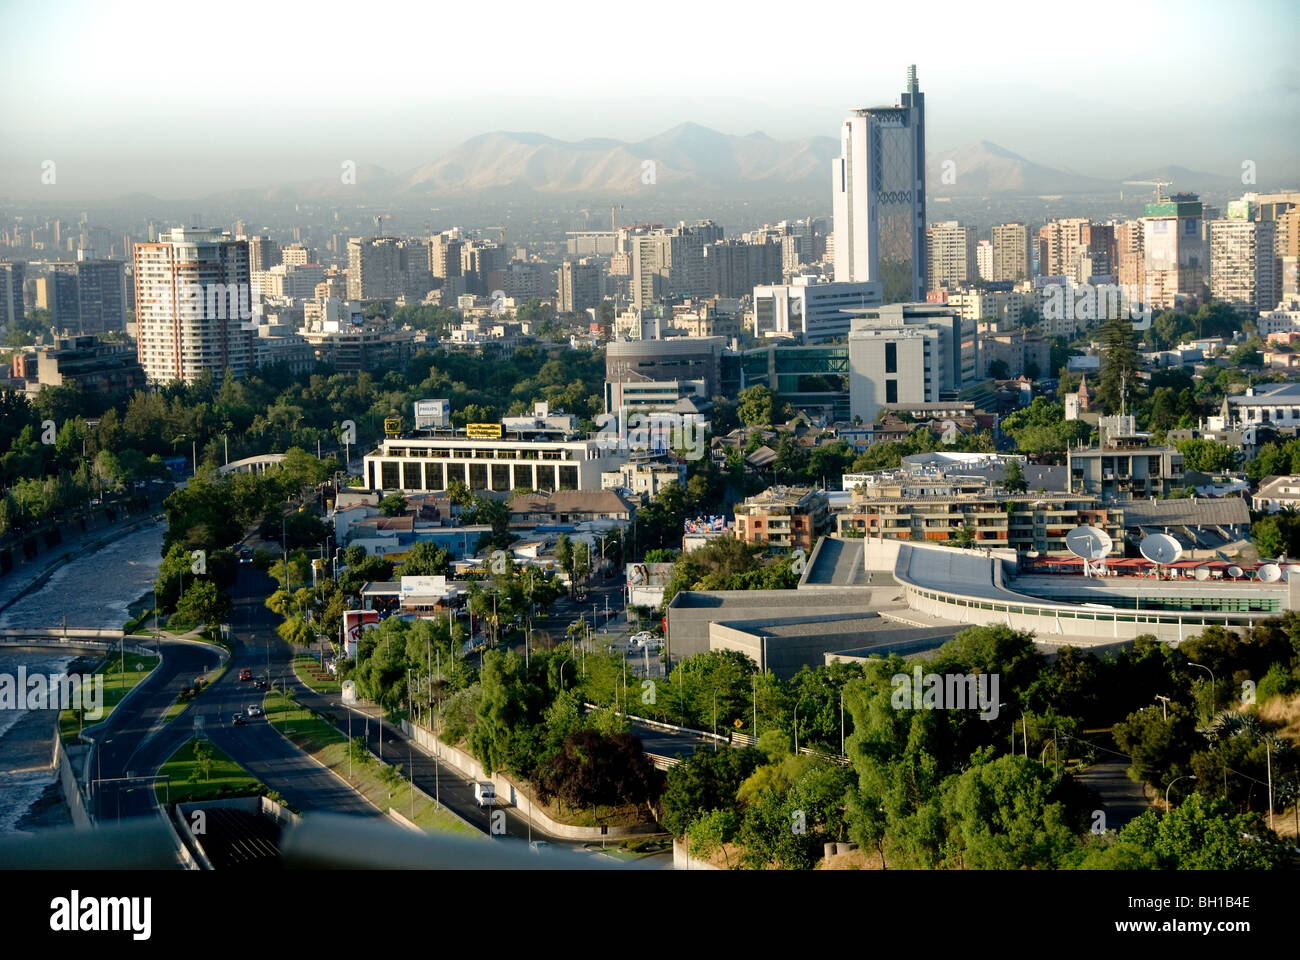 Chile's capital, financial center and it's largest city, founded in 1541, sits in a valley backed by the Andes, Santiago, Chile Stock Photo